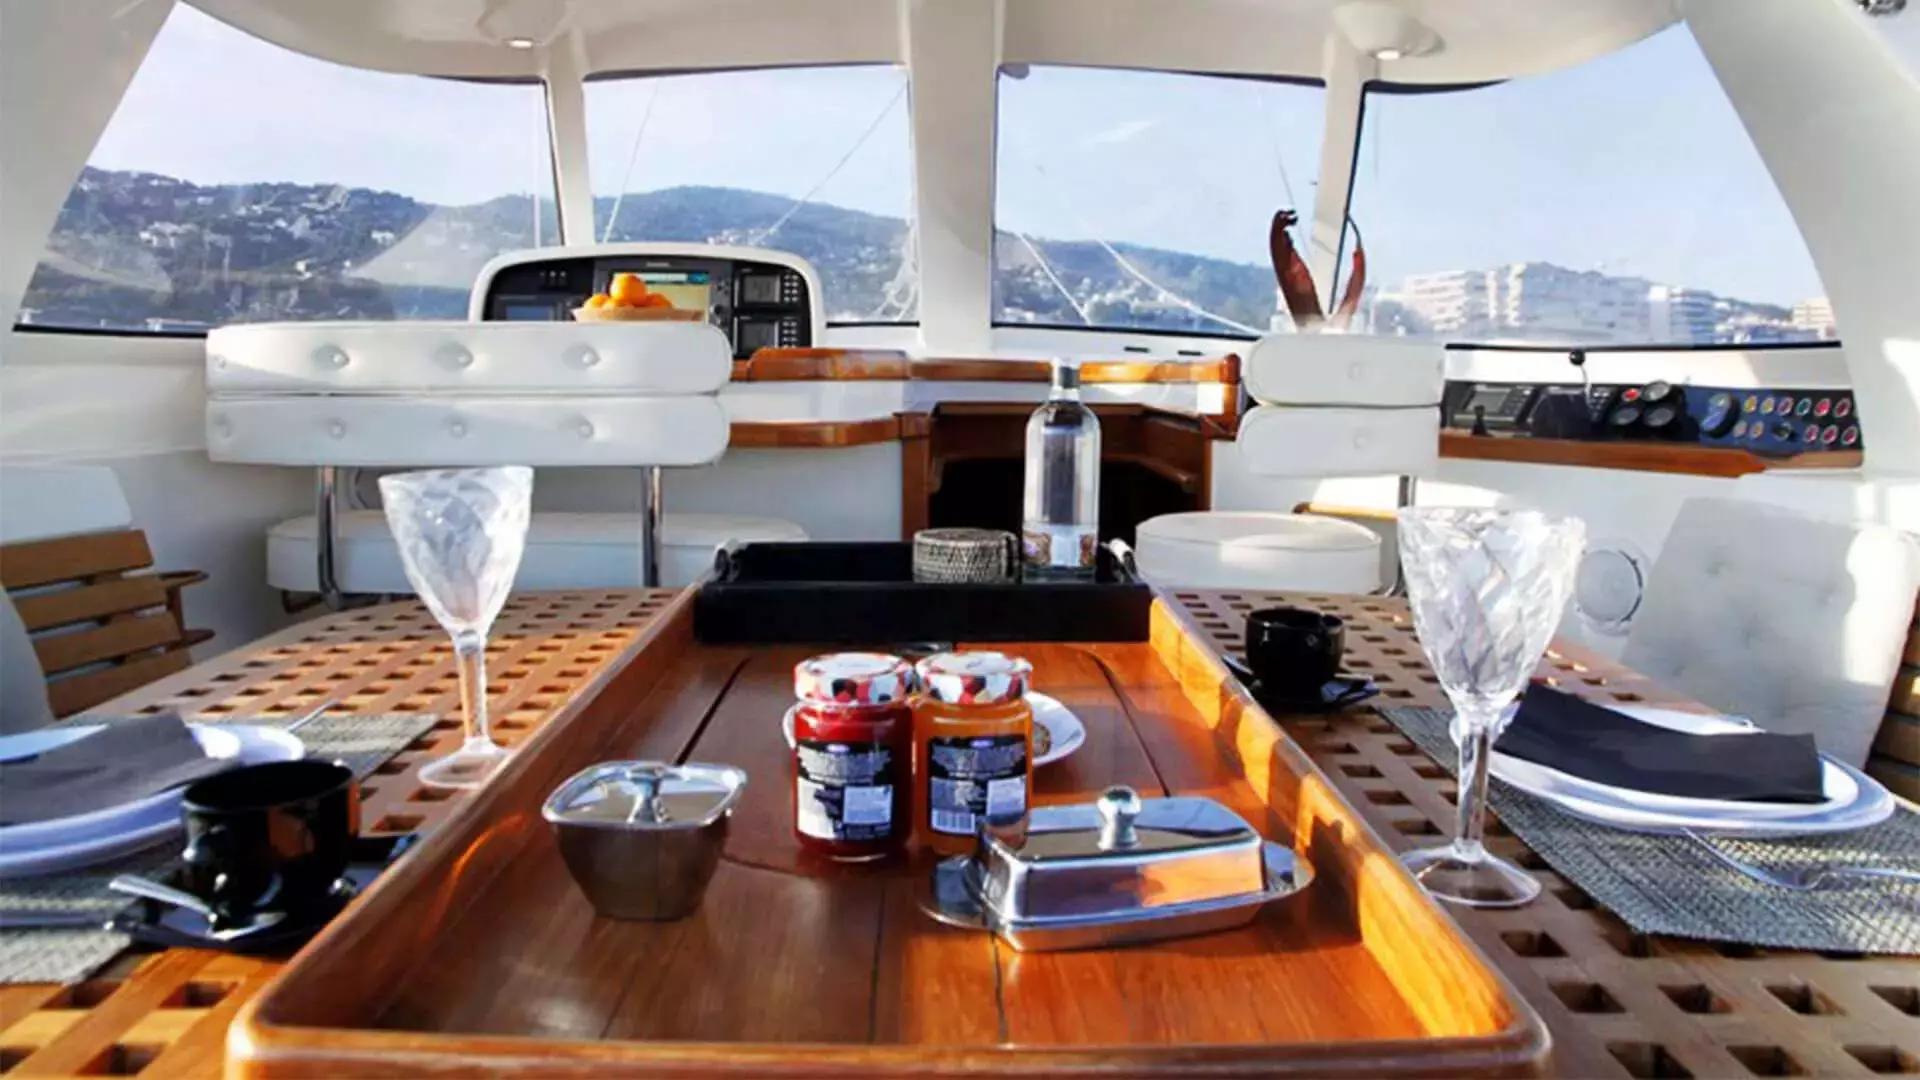 Ocean Phoenix by Pendennis - Top rates for a Charter of a private Motor Sailer in Costa Rica